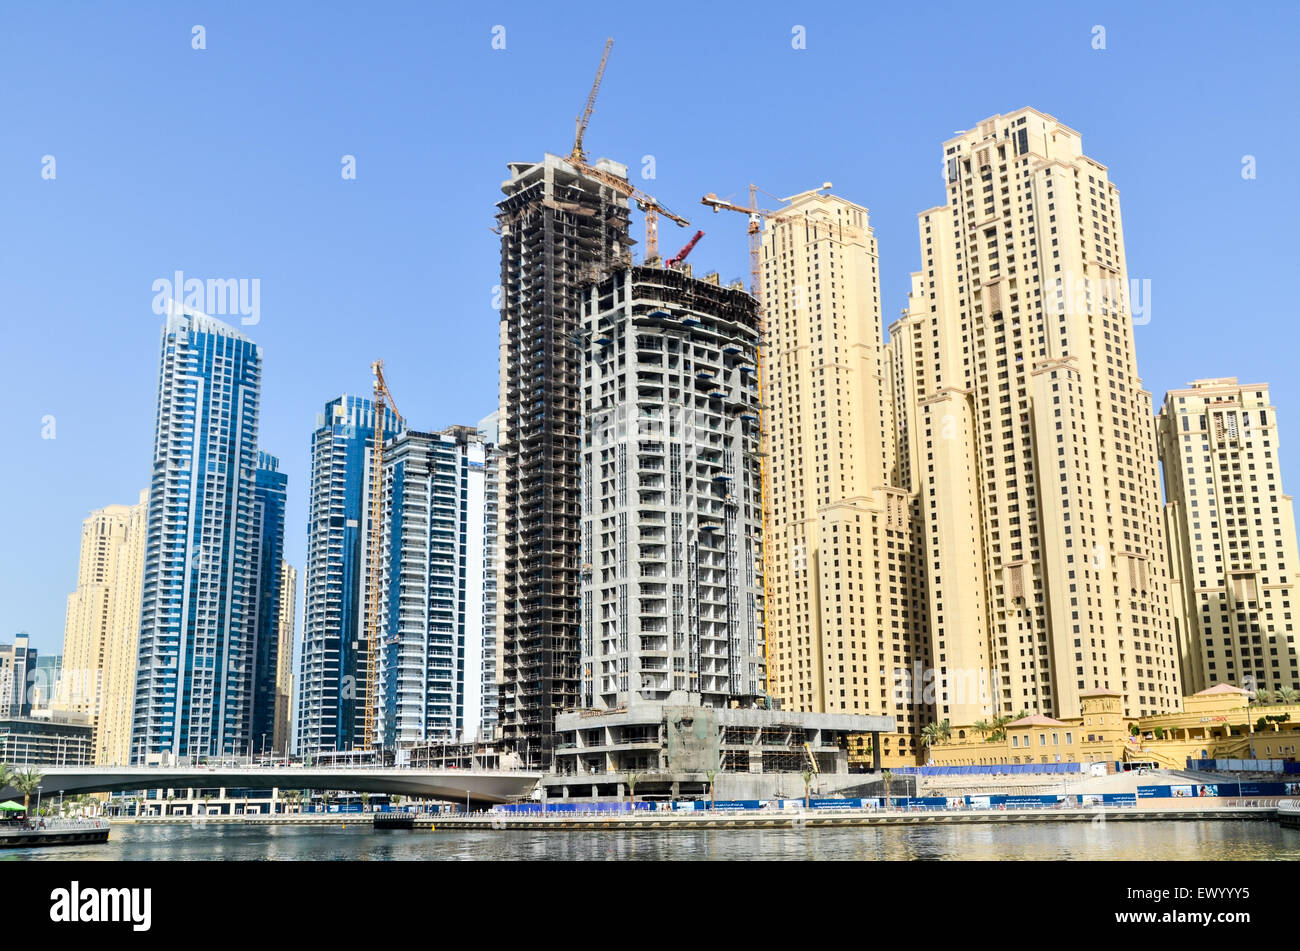 Construction of new towers, high rise residential buildings, and hotels of the Dubai Marina, United Arab Emirates Stock Photo